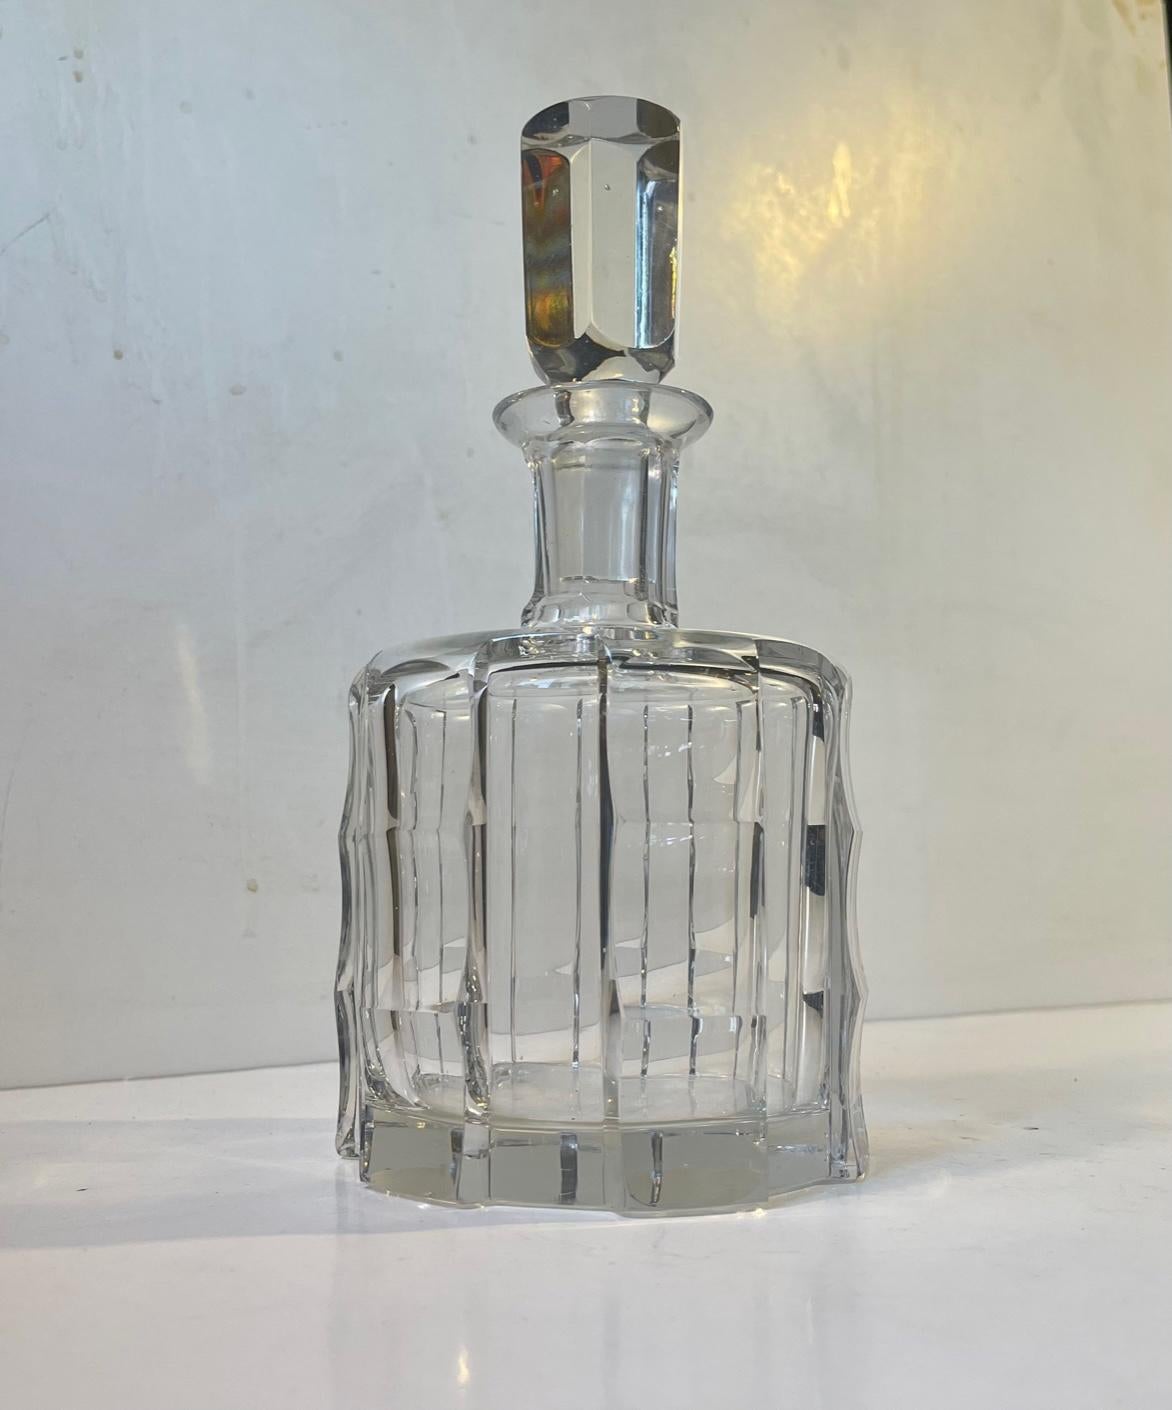 Fine heavy multi-faceted decanter in blown crystal glass. Distinct Art Deco styling with a faux bamboo pattern. It was made by Orrefors in Sweden circa 1950 based upon a design from the 1930s. Measurements: height: 24/18 cm, diameter: 12 cm.